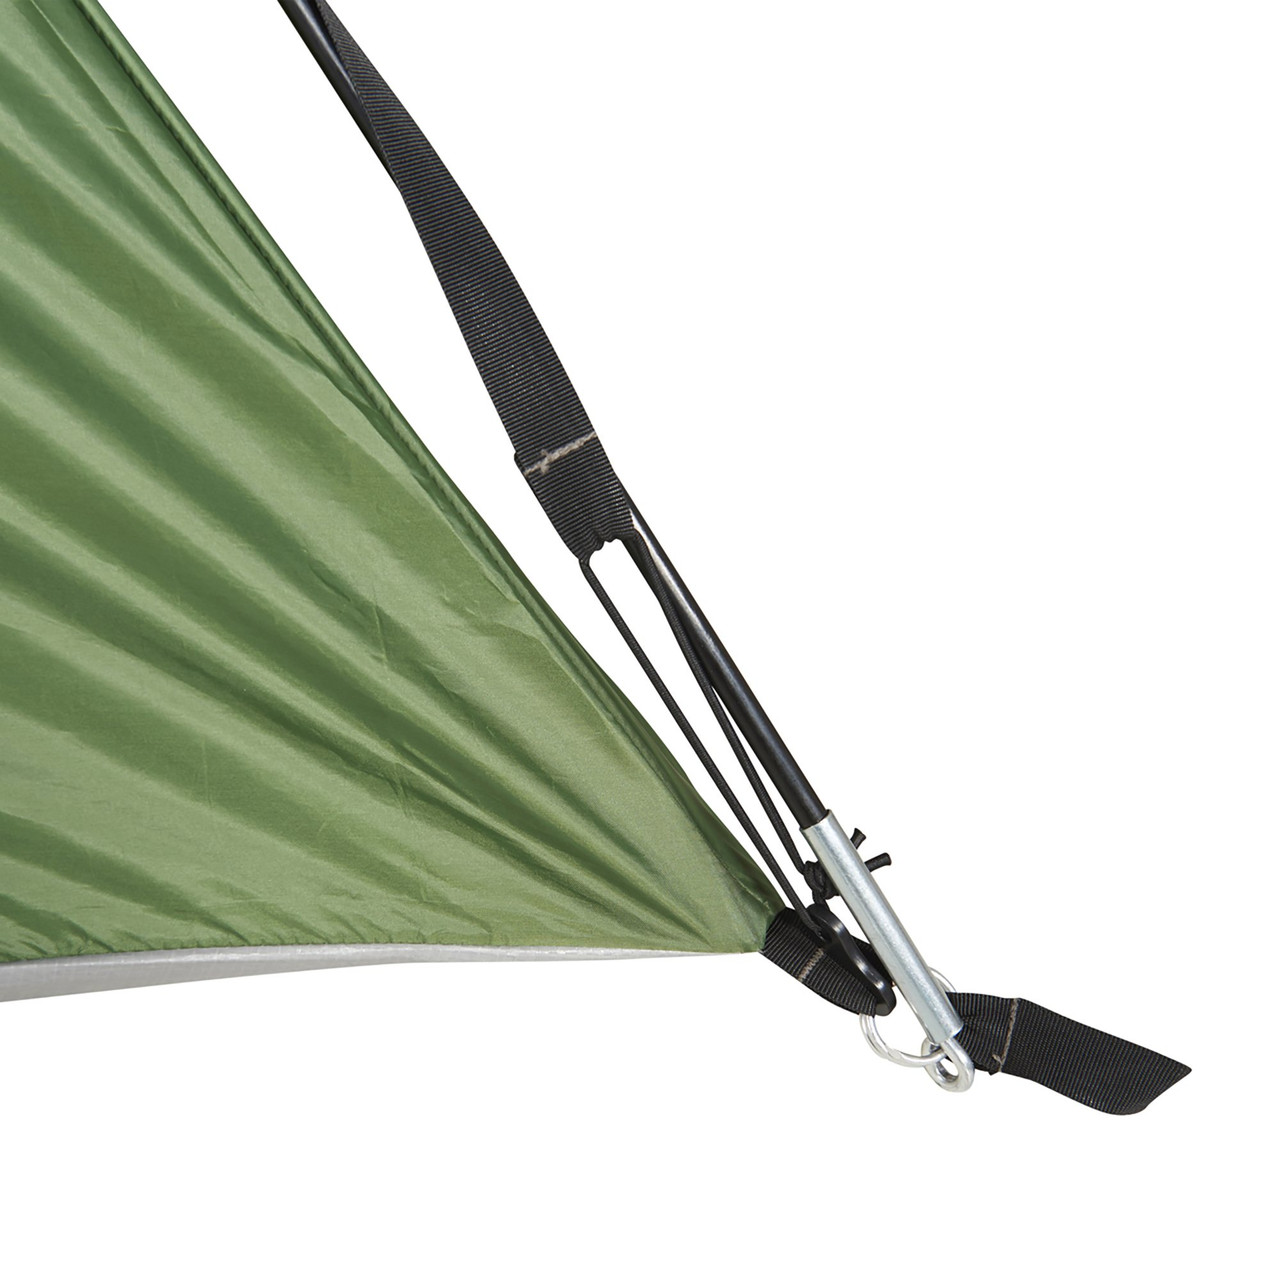 Close up of Wenzel Jack Pine 4 Person Dome Tent, showing end of tent pole inserted into attachment point at bottom corner of tent